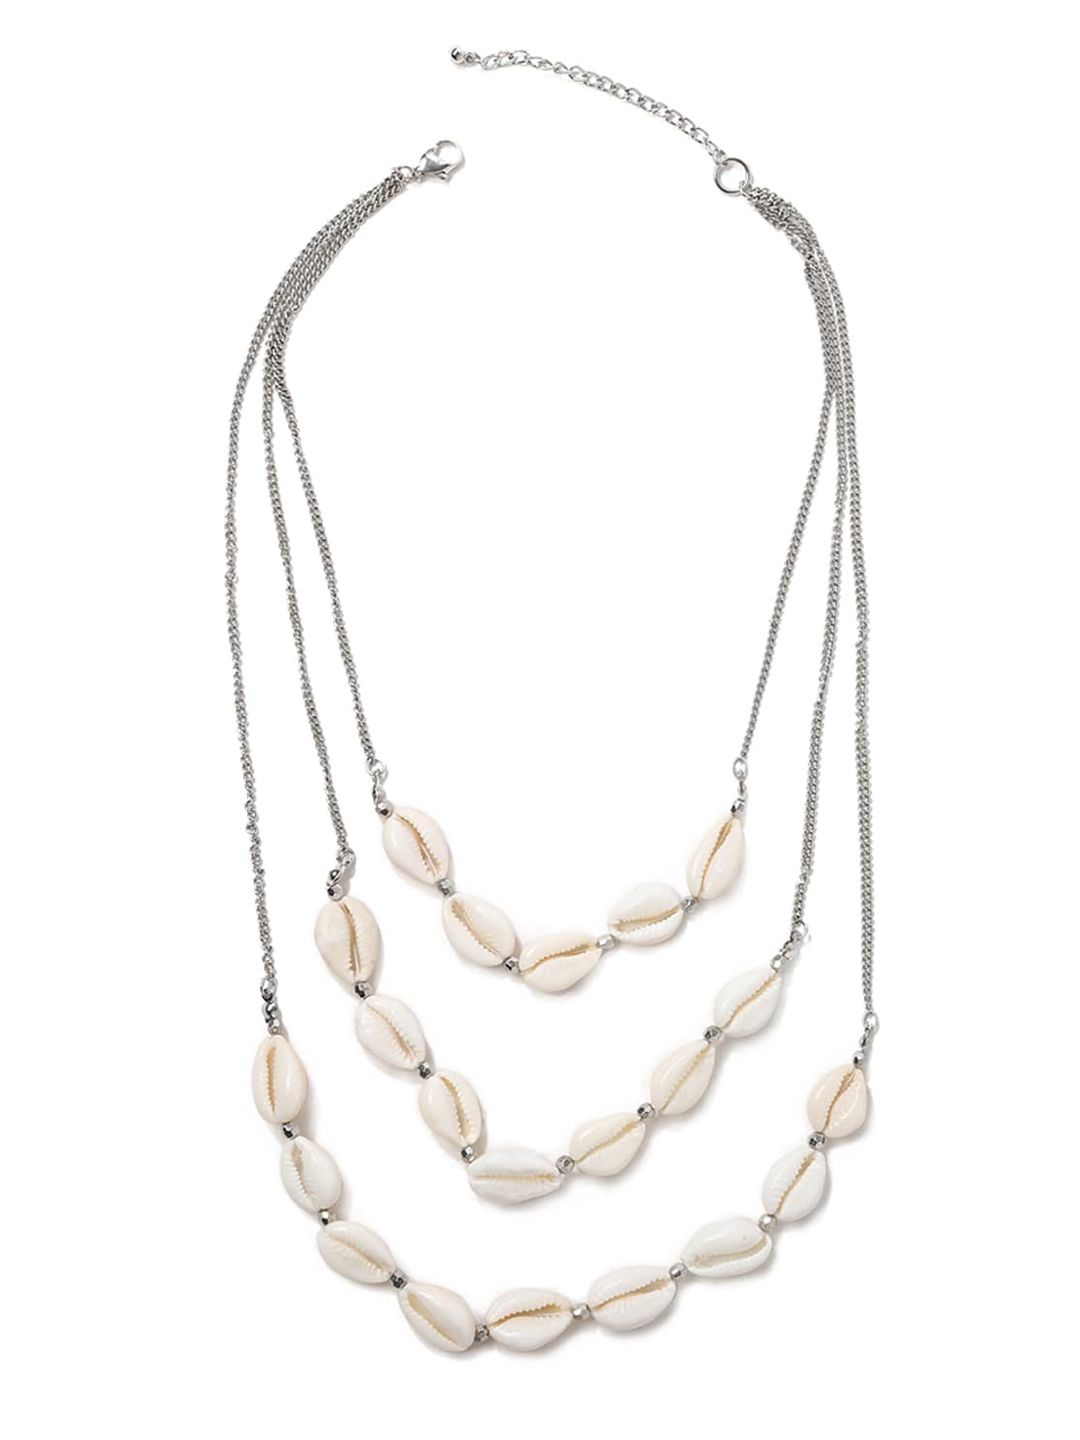 FOREVER 21 Women Silver & Cream-Coloured Layered Necklace Price in India